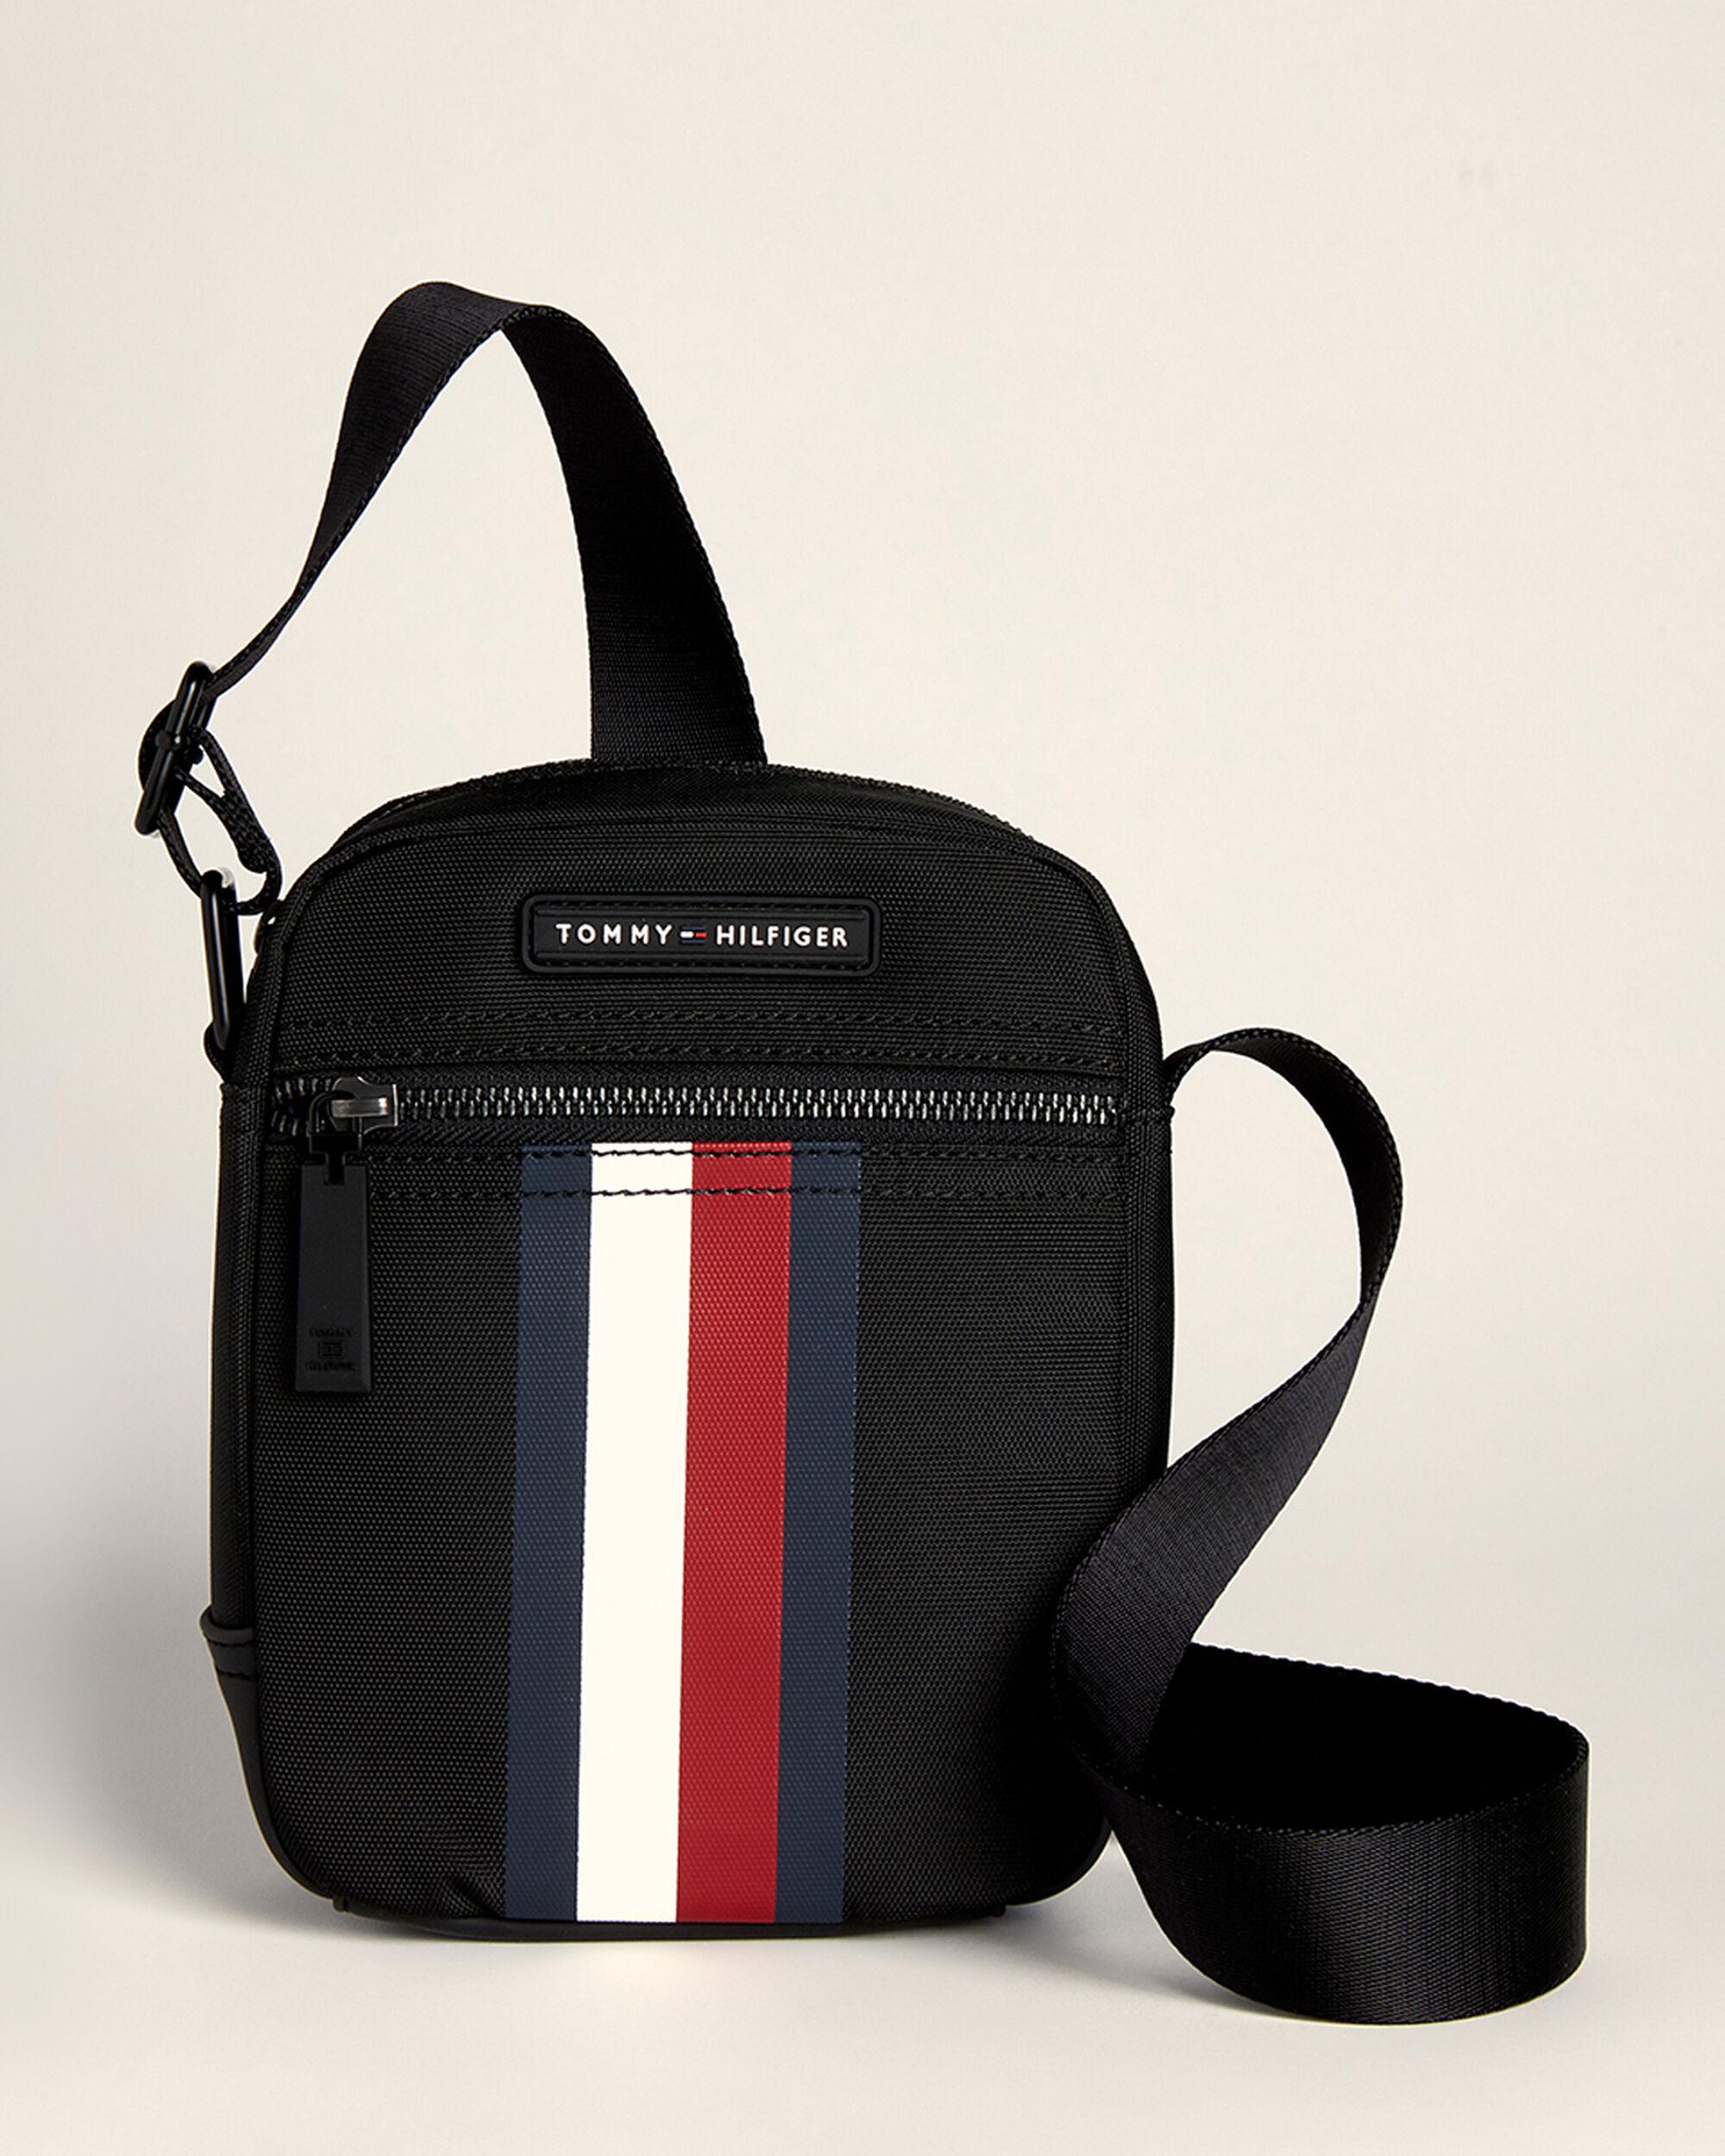 century 21 tommy hilfiger bags Cheaper 